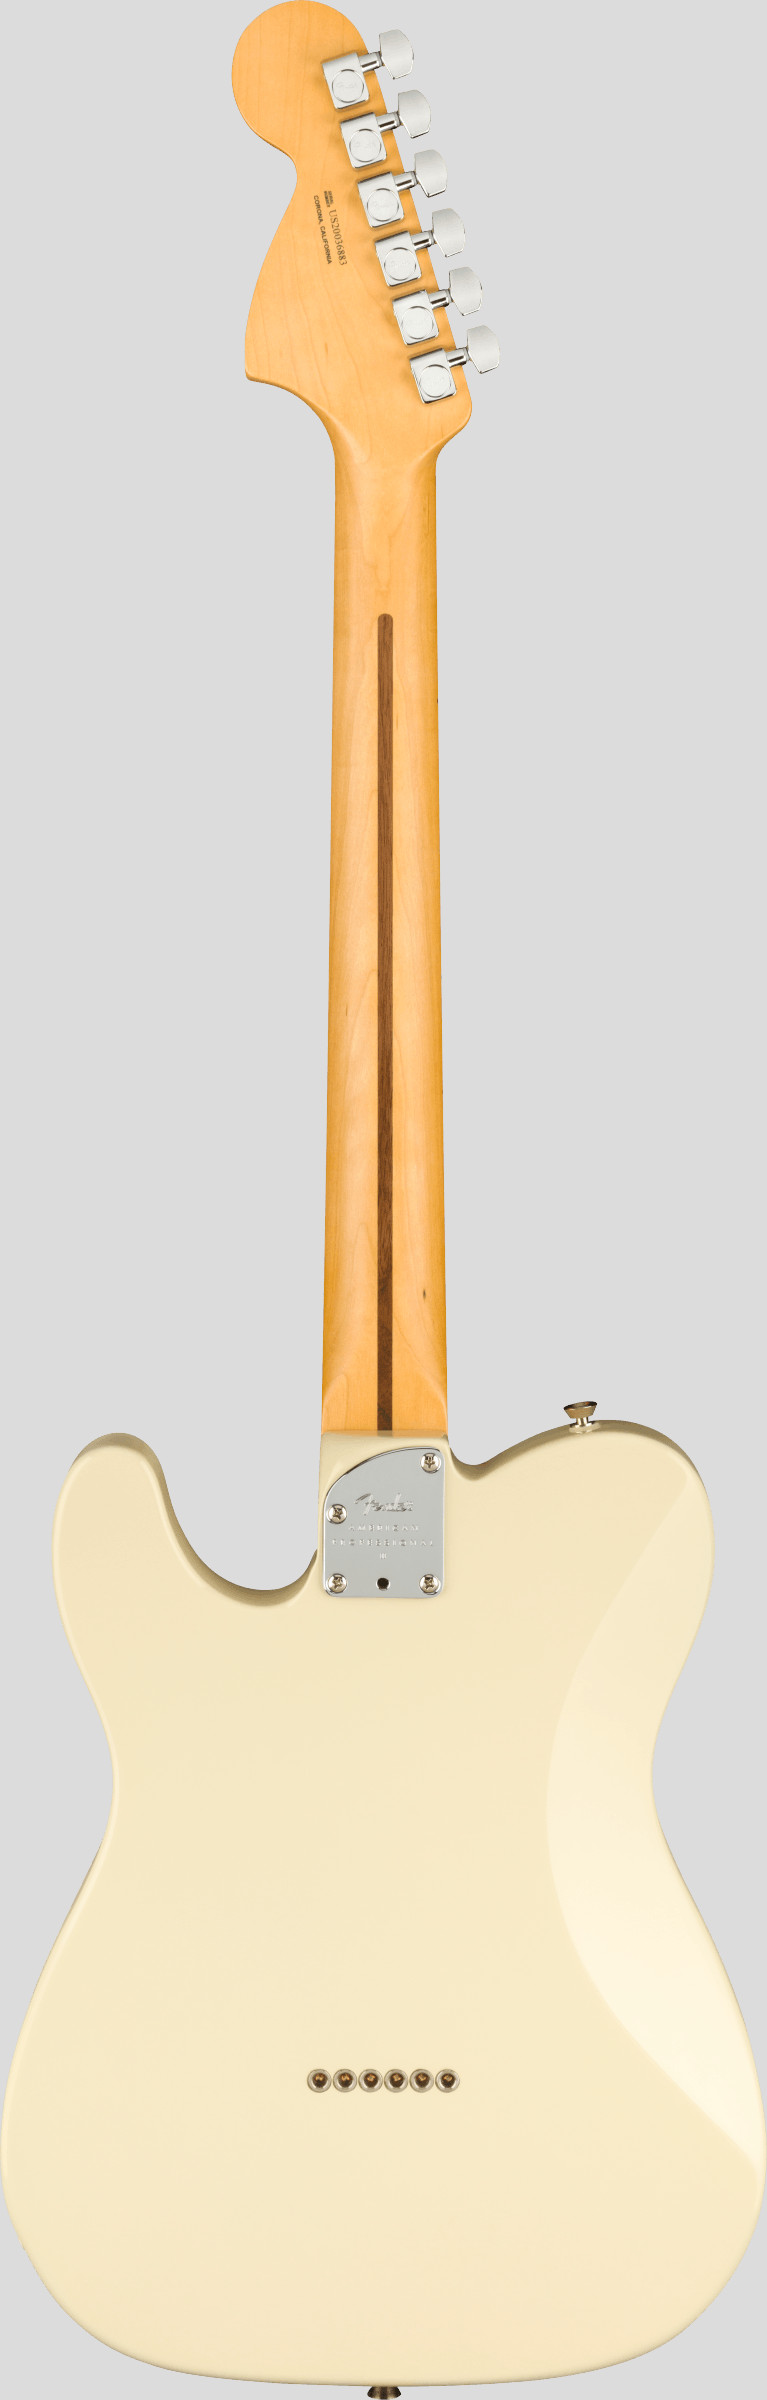 Fender American Professional II Telecaster Deluxe Olympic White 2